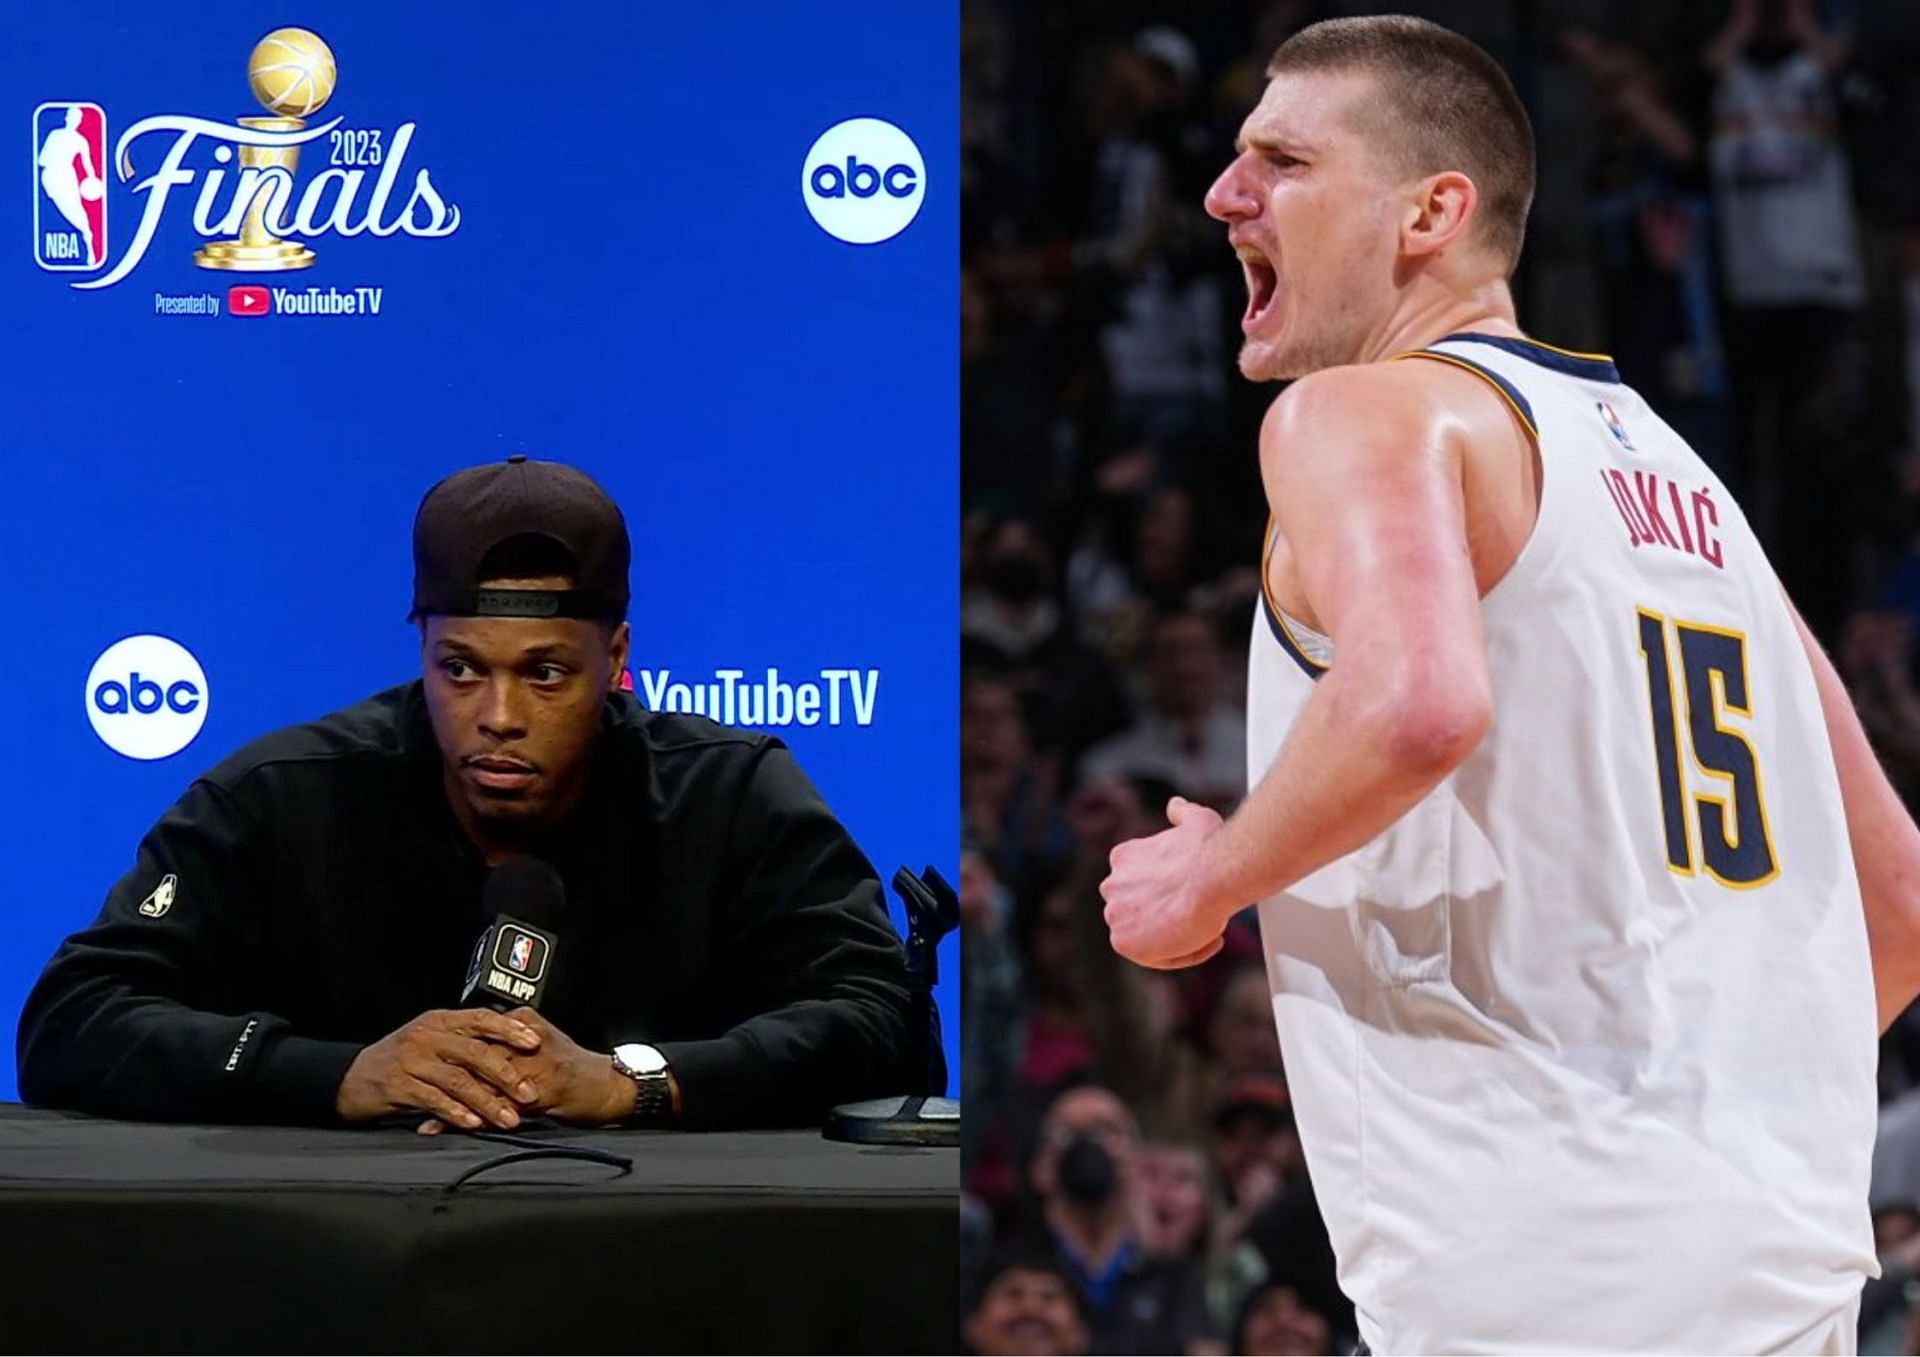 Miami Heat guard Kyle Lowry was shocked Nikola Jokic had 41 points in Game 2 of the NBA Finals.